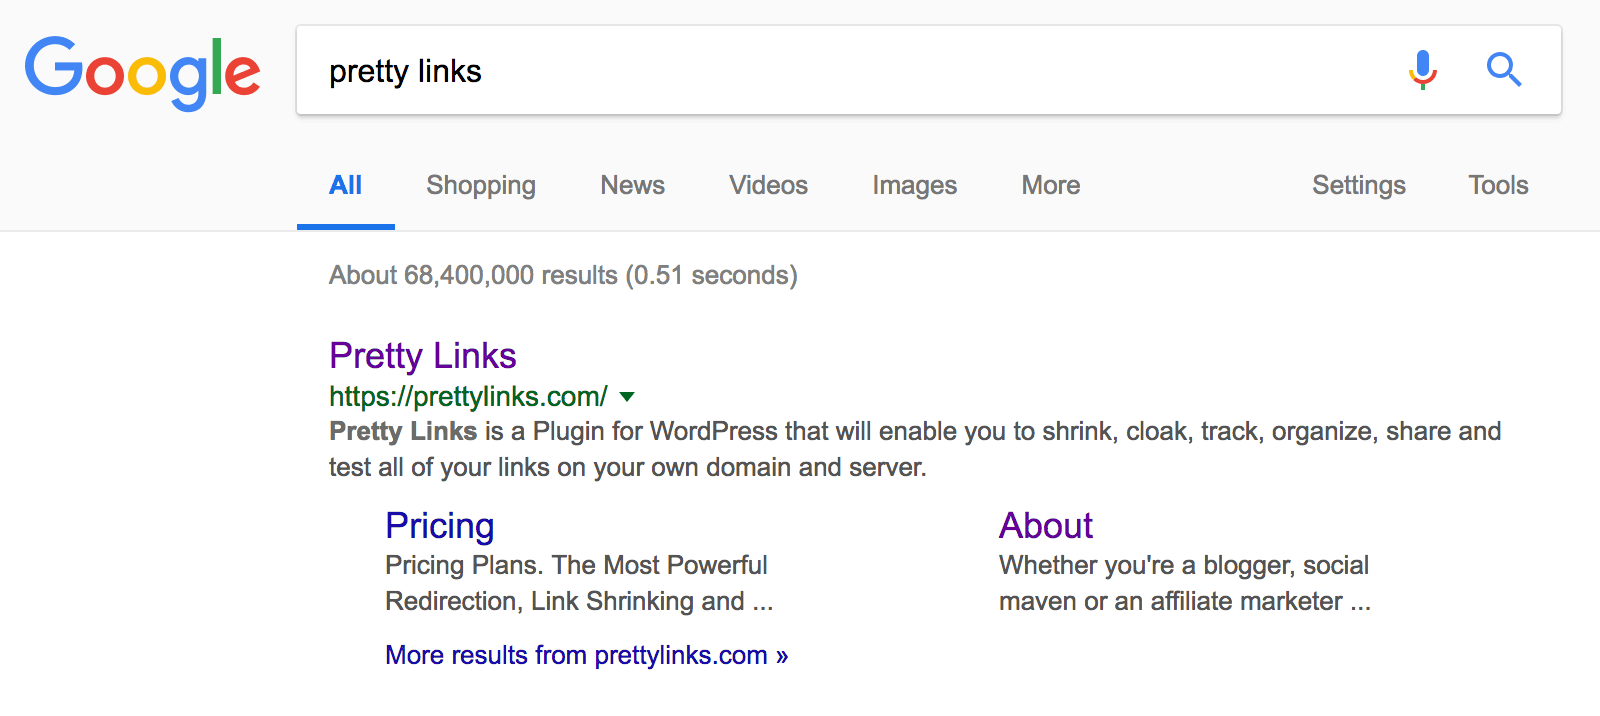 Google search results for "pretty links".